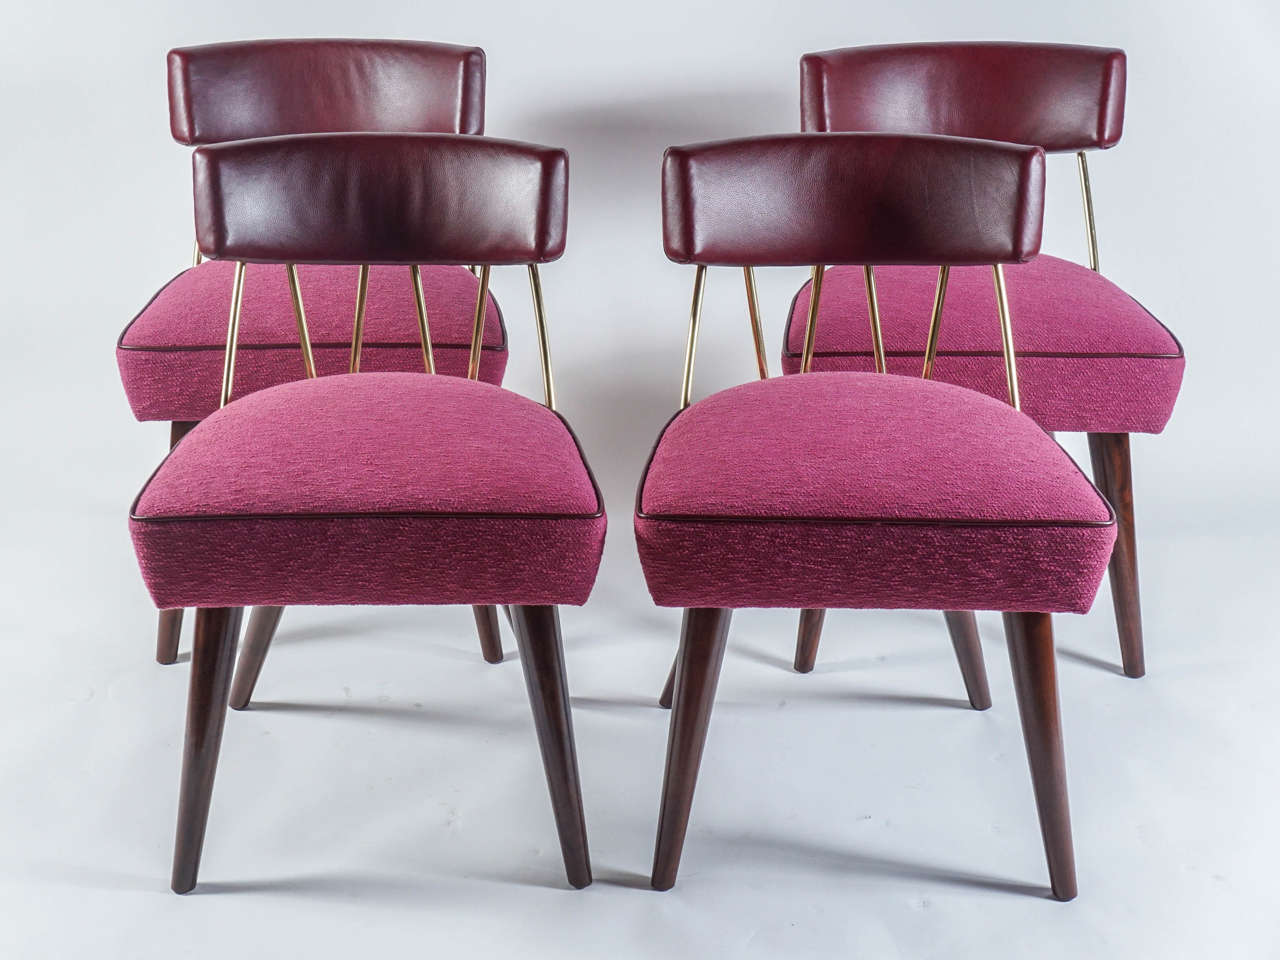 Billy Haines’s Drum chair upholstered in burgundy leather (back and welt) and fuschia woven fabric (seat). Dark wood tapered, splayed legs and brass back detail. Excellent vintage condition.